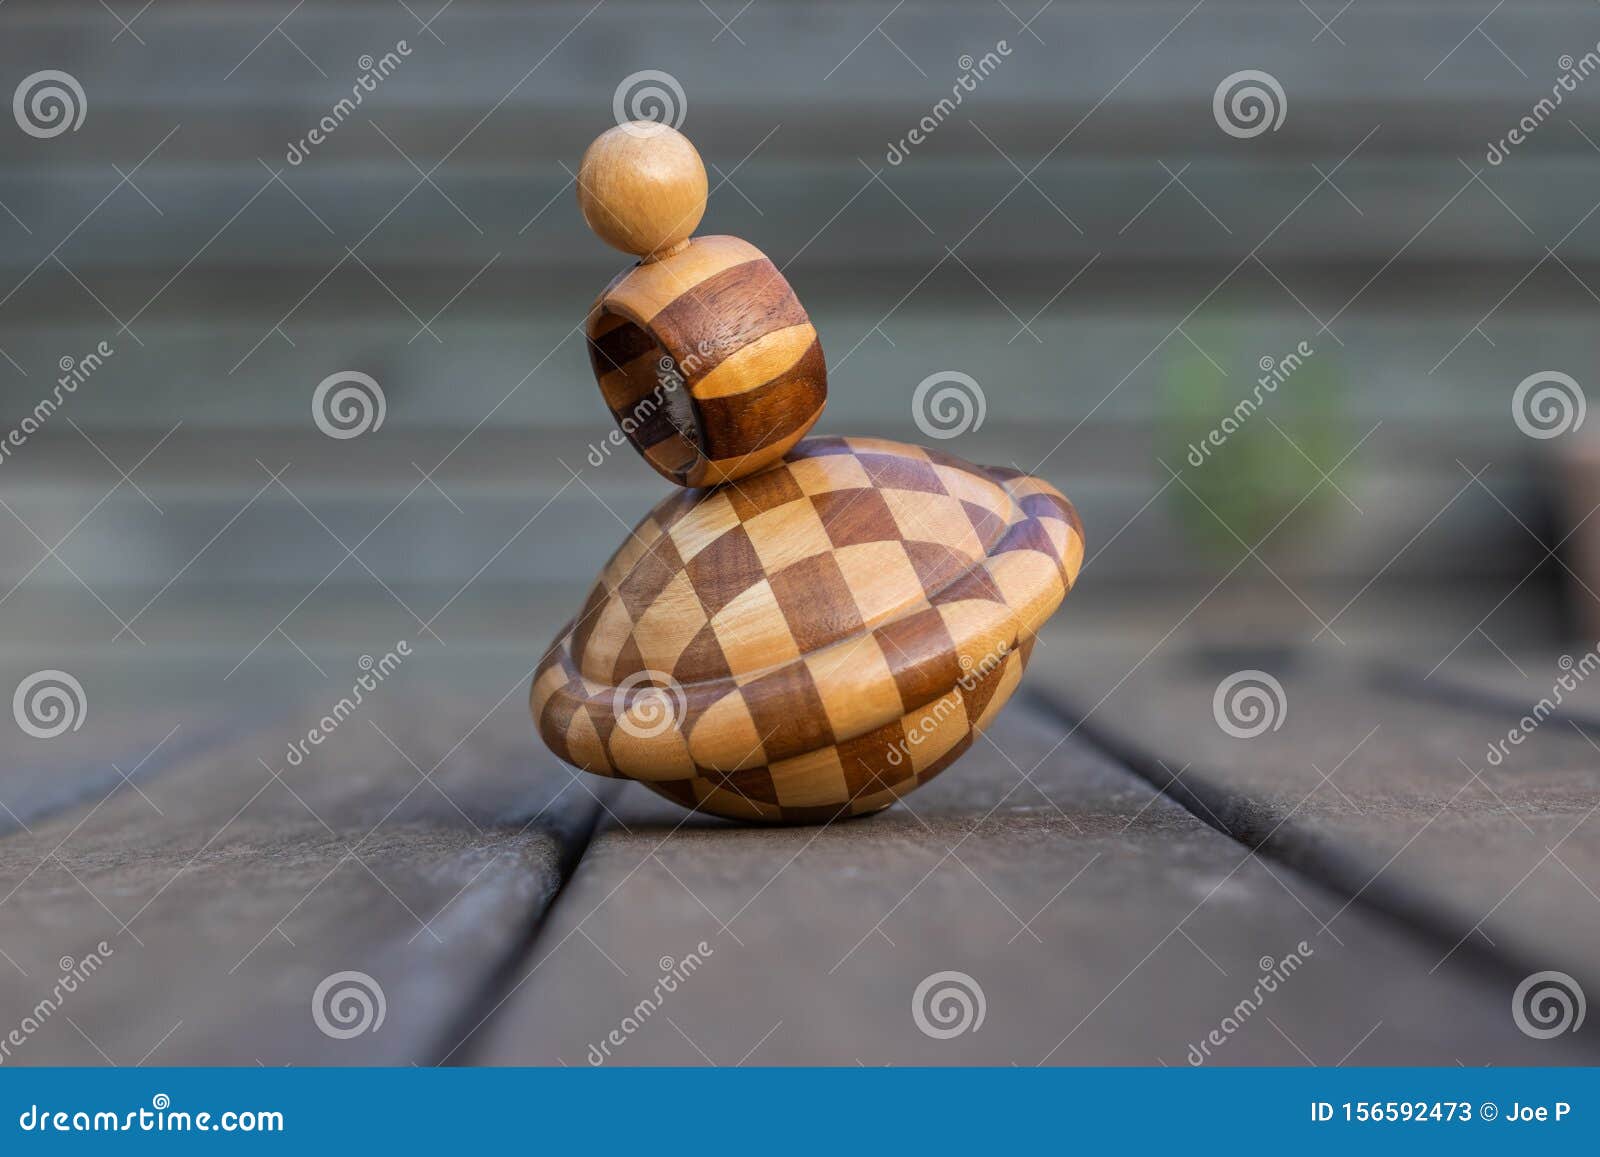 wooden vintage spinning top over a table with blurry background